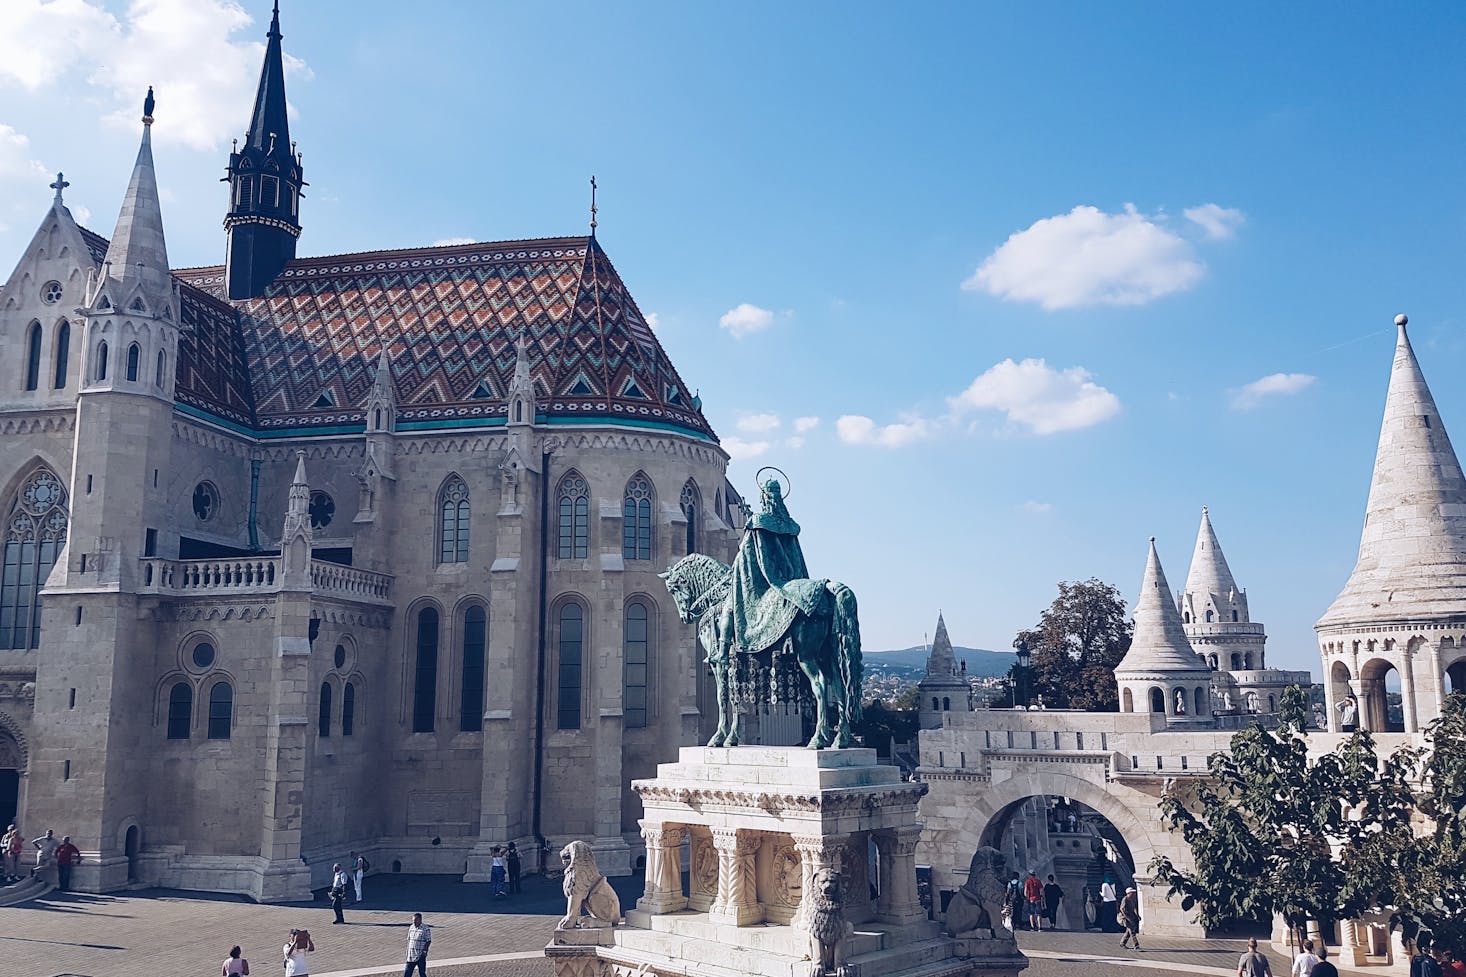 Spend 3 days in Budapest